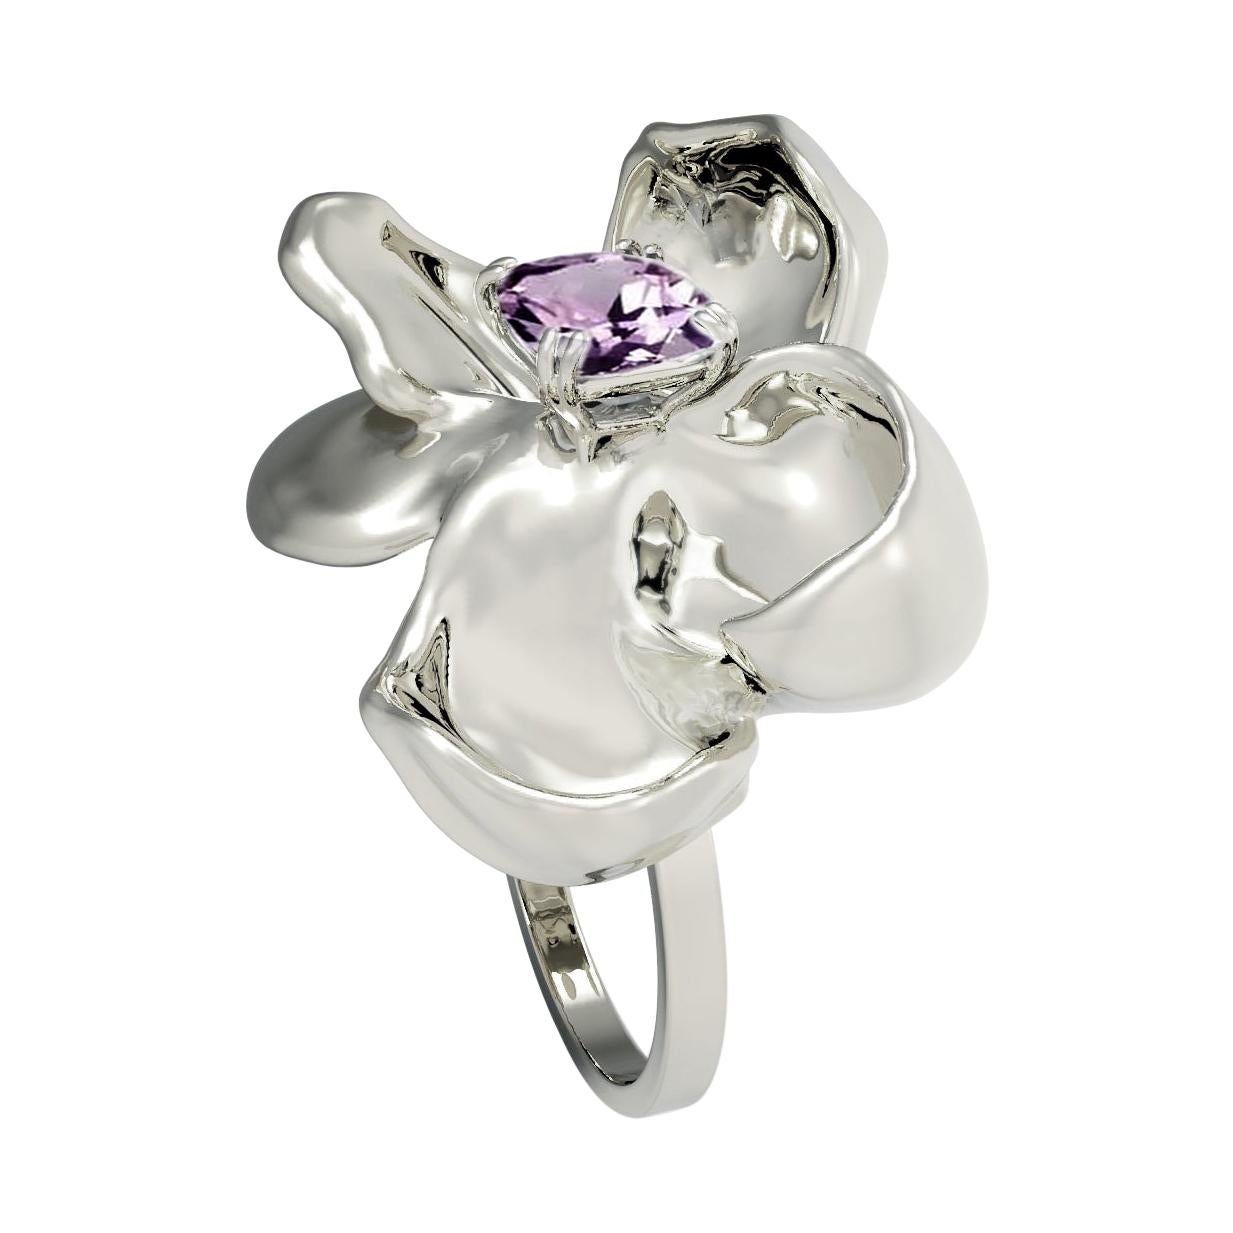 18 Karat White Gold Contemporary Cocktail Ring with Berry Spinel by Artist